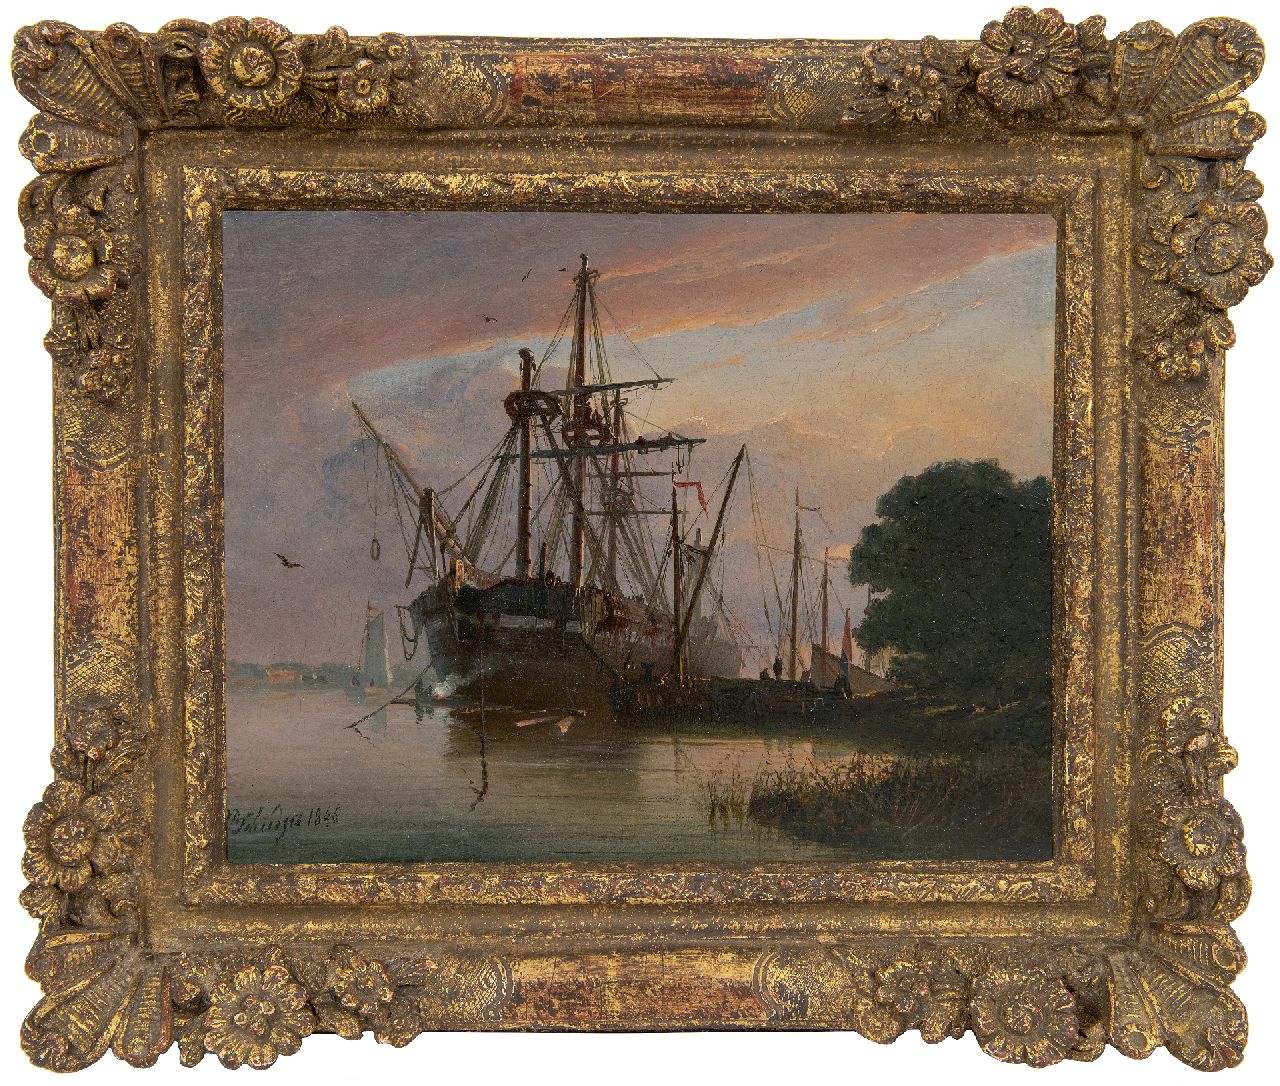 Schiedges P.P.  | Petrus Paulus Schiedges | Paintings offered for sale | Moored three-master at sunset, oil on panel 16.2 x 20.9 cm, signed l.l. and dated 1846